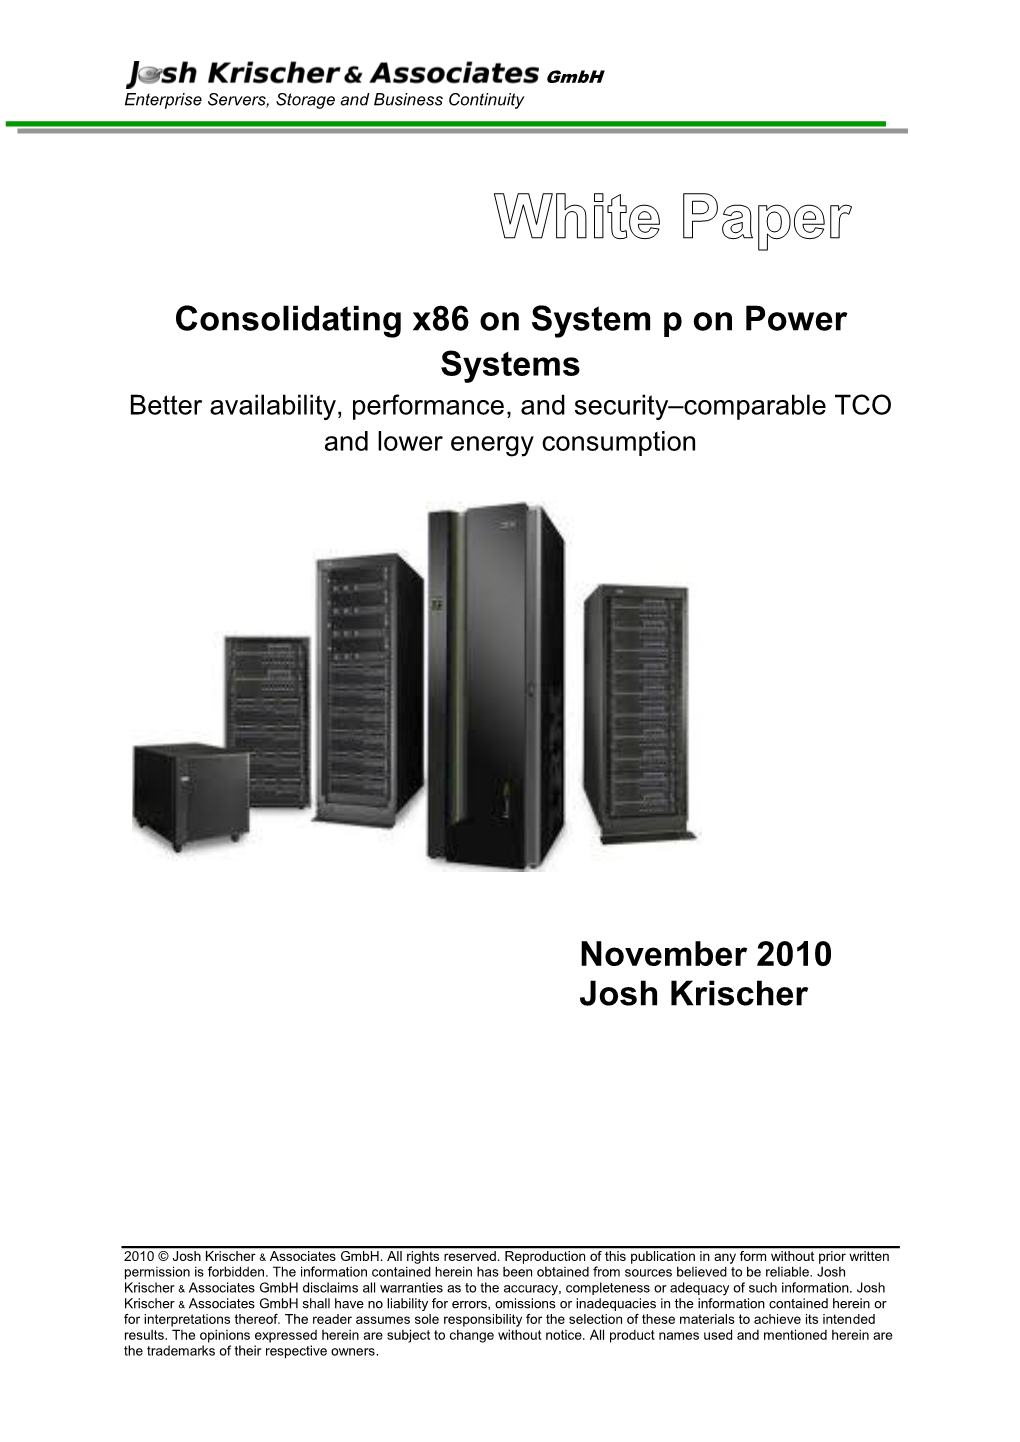 Consolidating X86 on System P on Power Systems November 2010 Josh Krischer